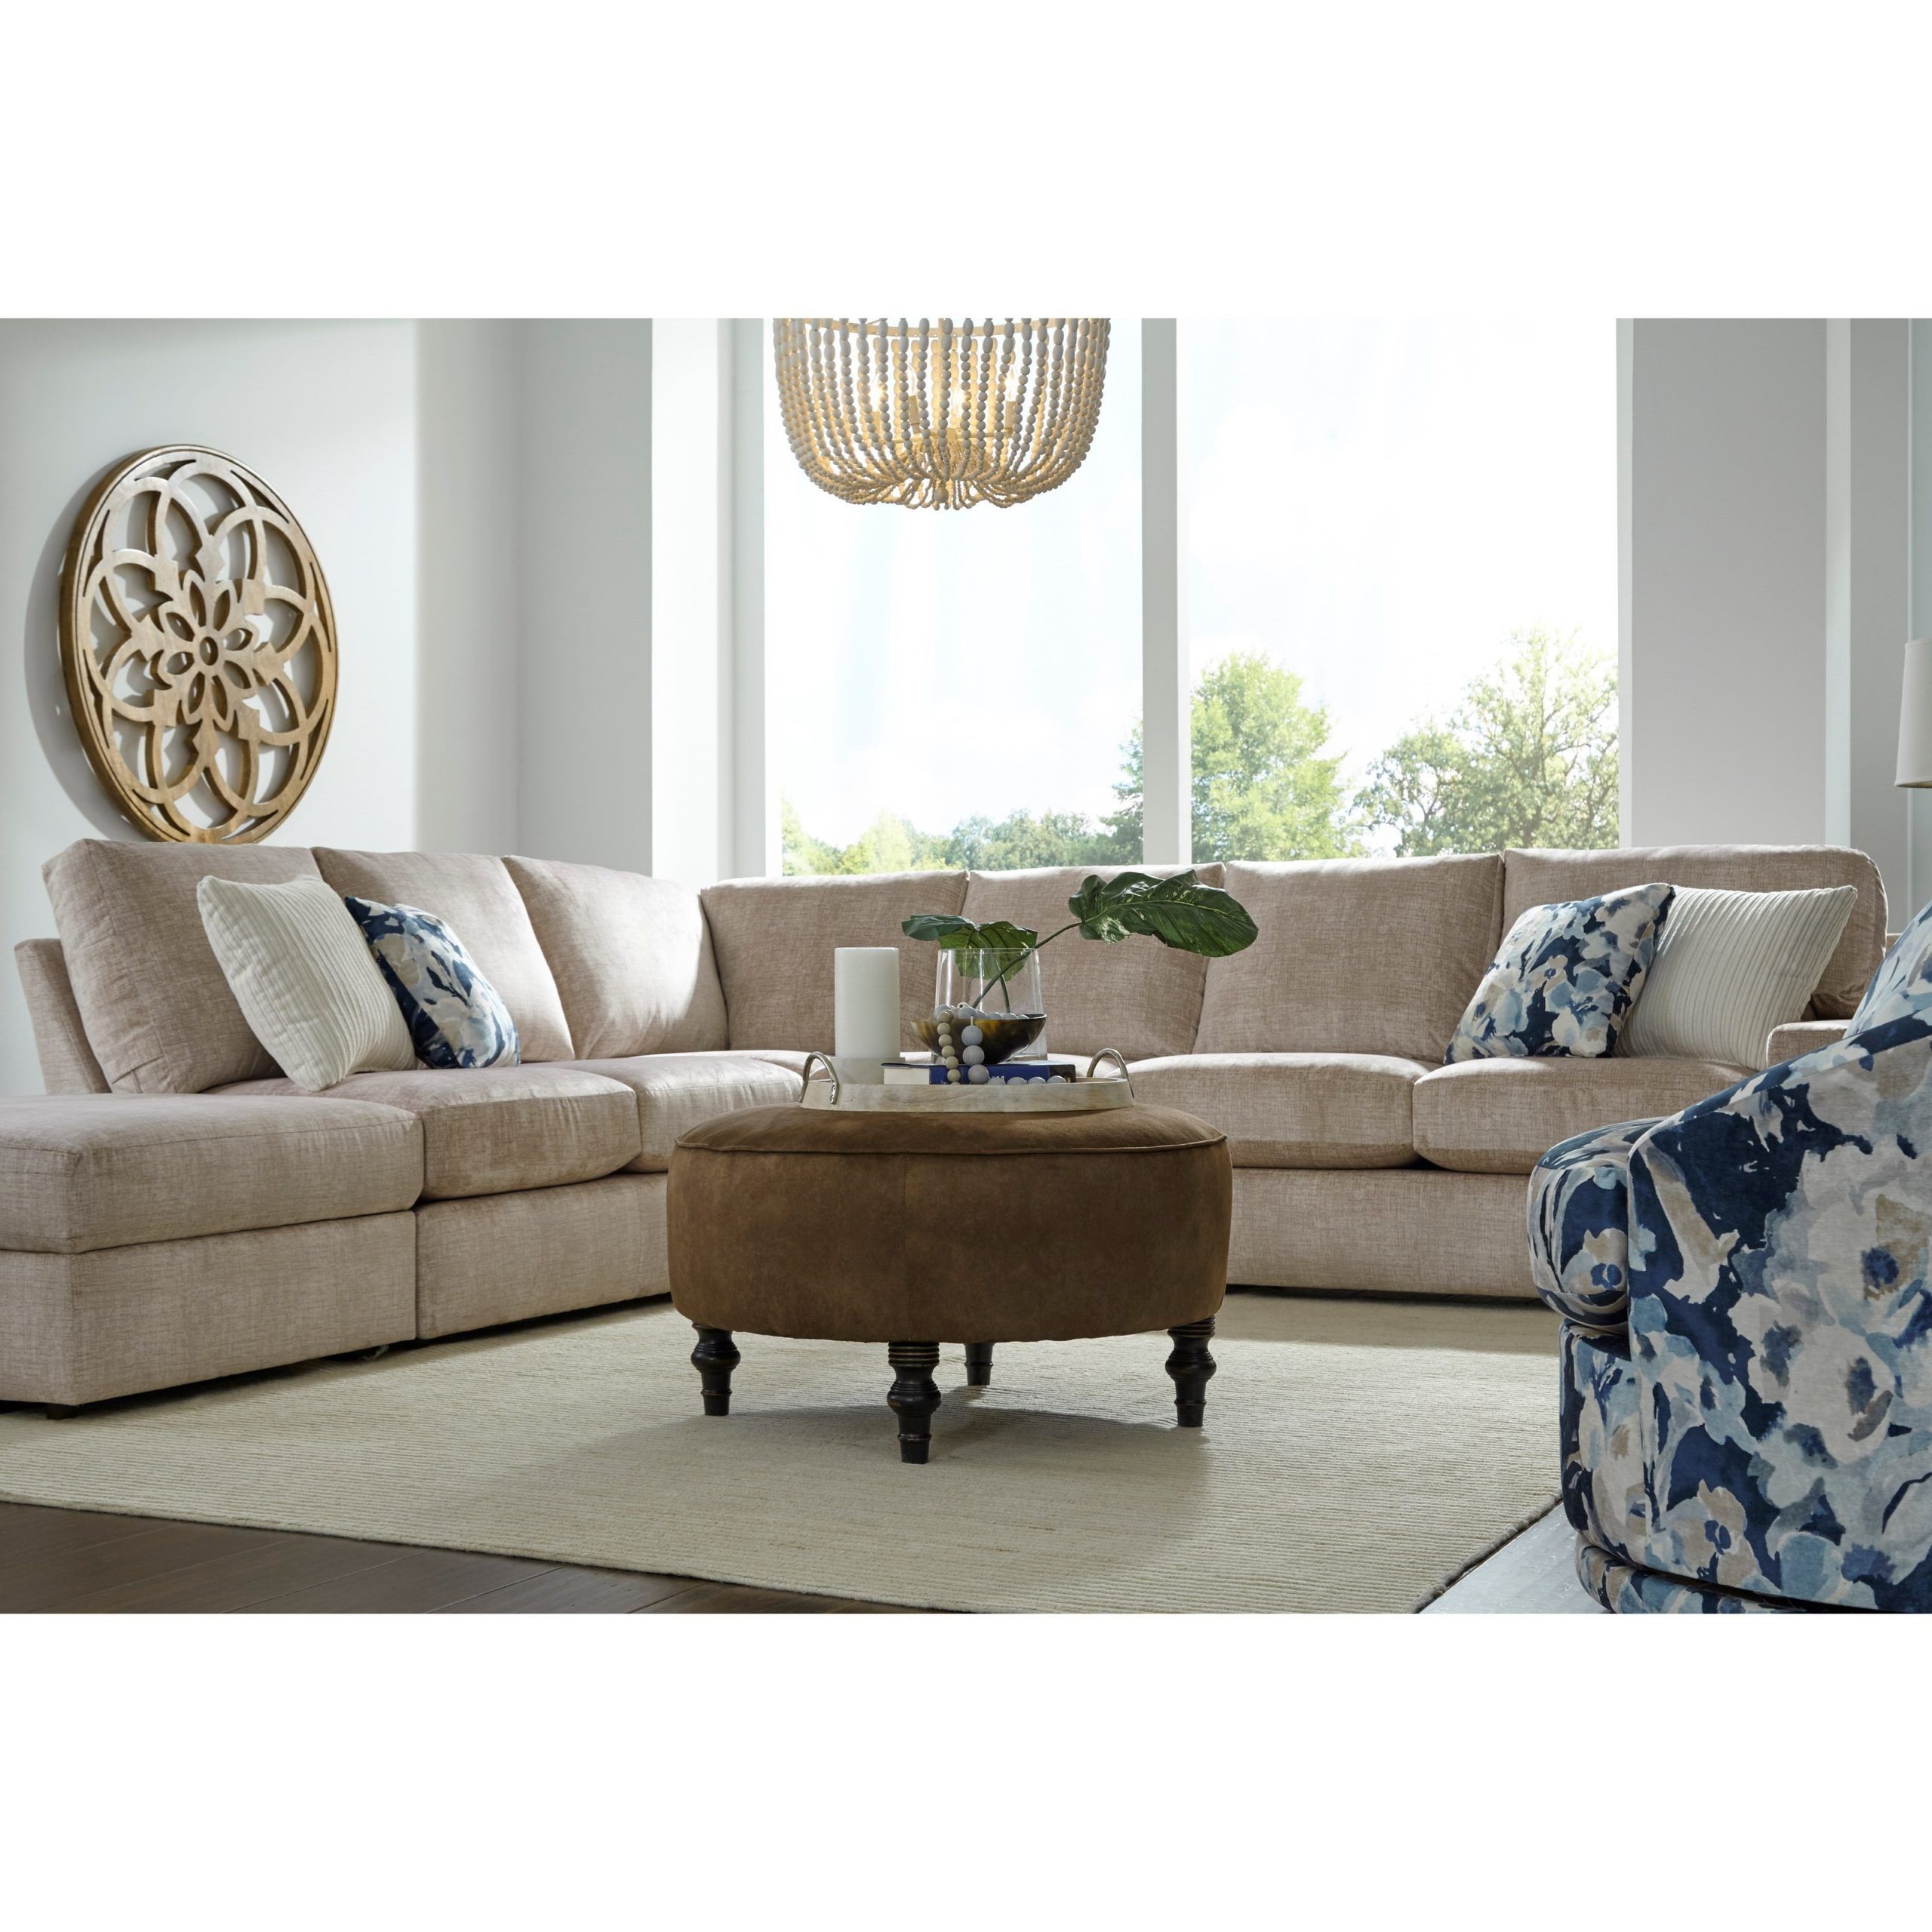 2018 Best Home Furnishings Dovely Casual Five Seat Sectional Pertaining To Copenhagen Reversible Small Space Sectional Sofas With Storage (View 3 of 20)